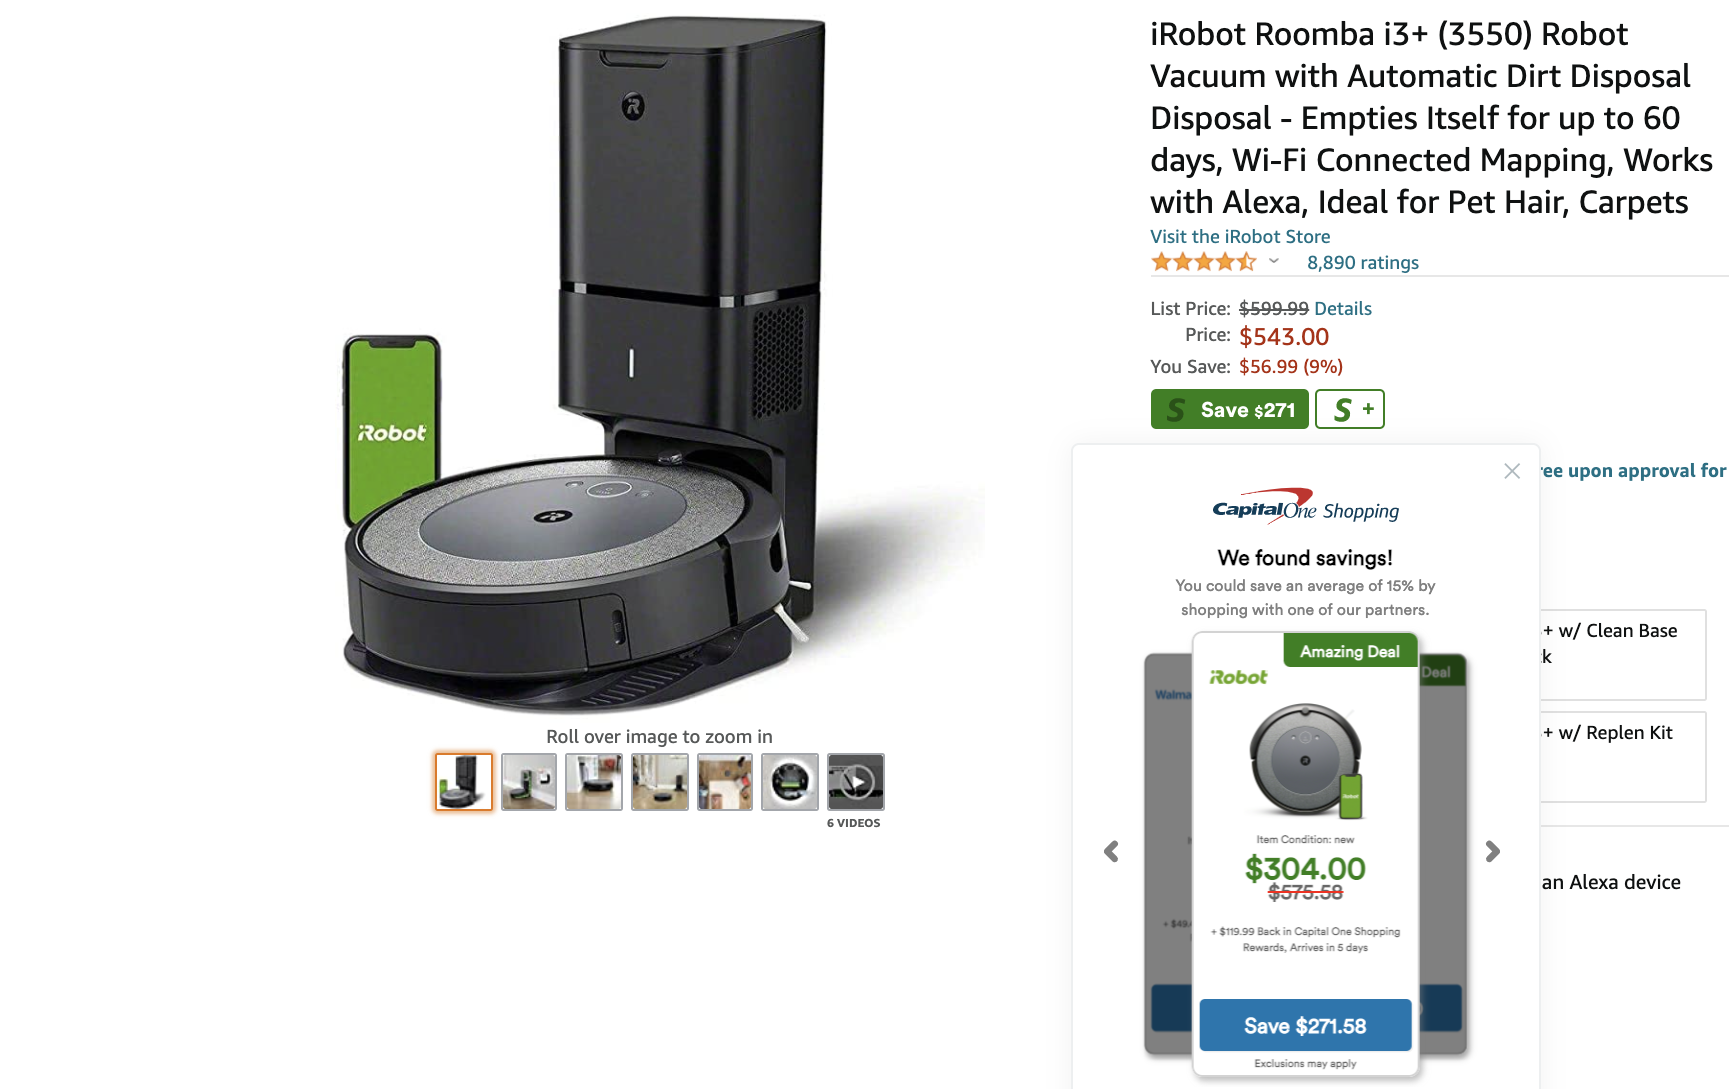 Amazon webpage for Roomba with Capital One Shopping extension